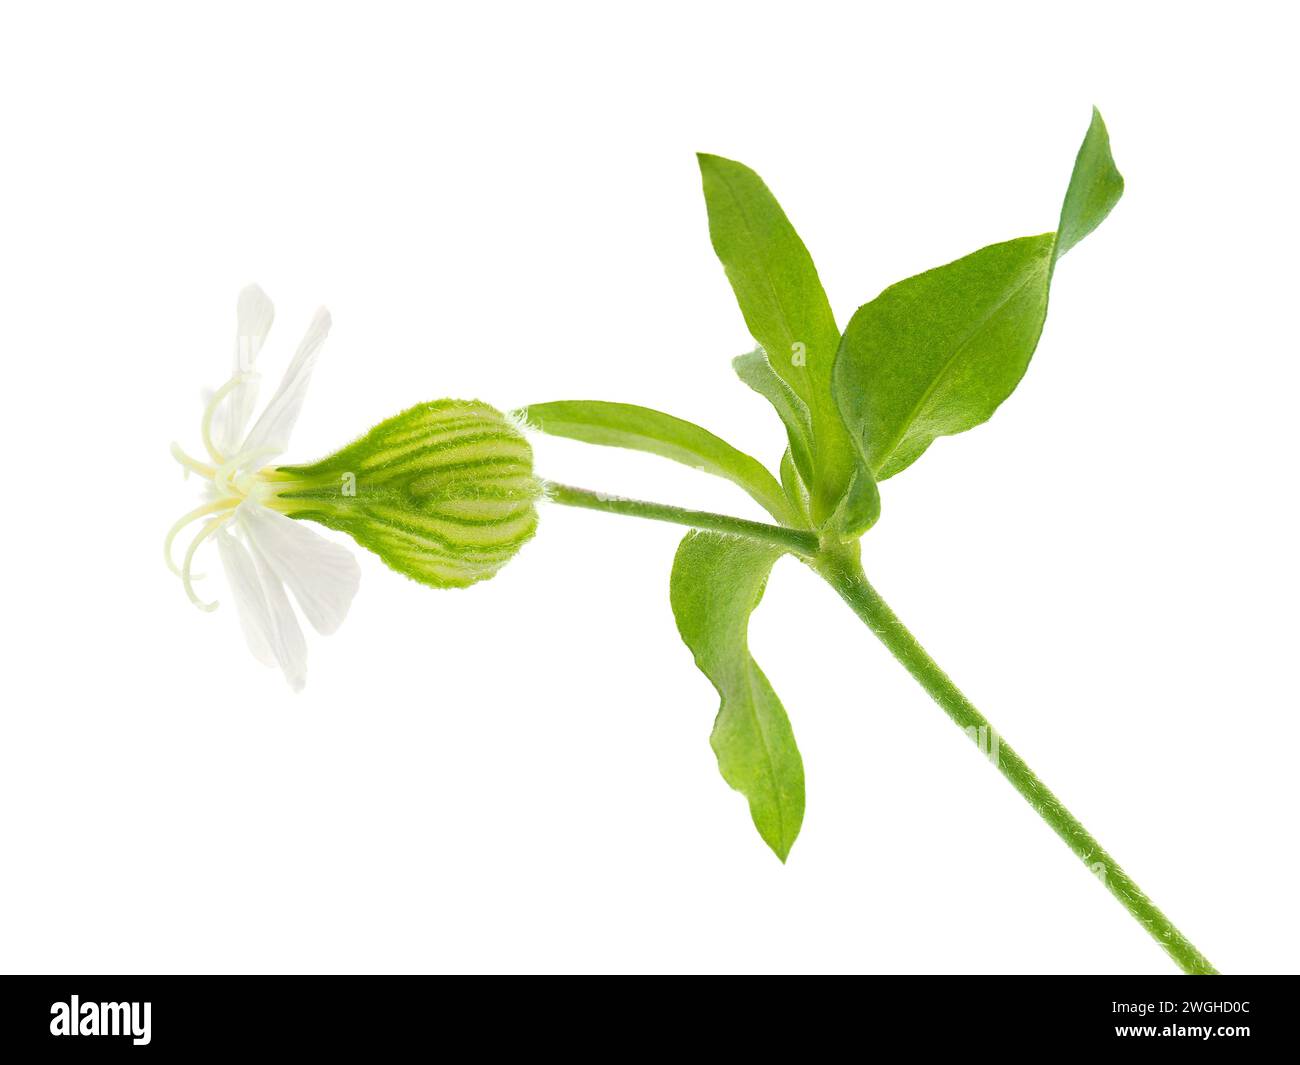 Forked catchfly flower isolated on white background, Silene dichotoma Stock Photo